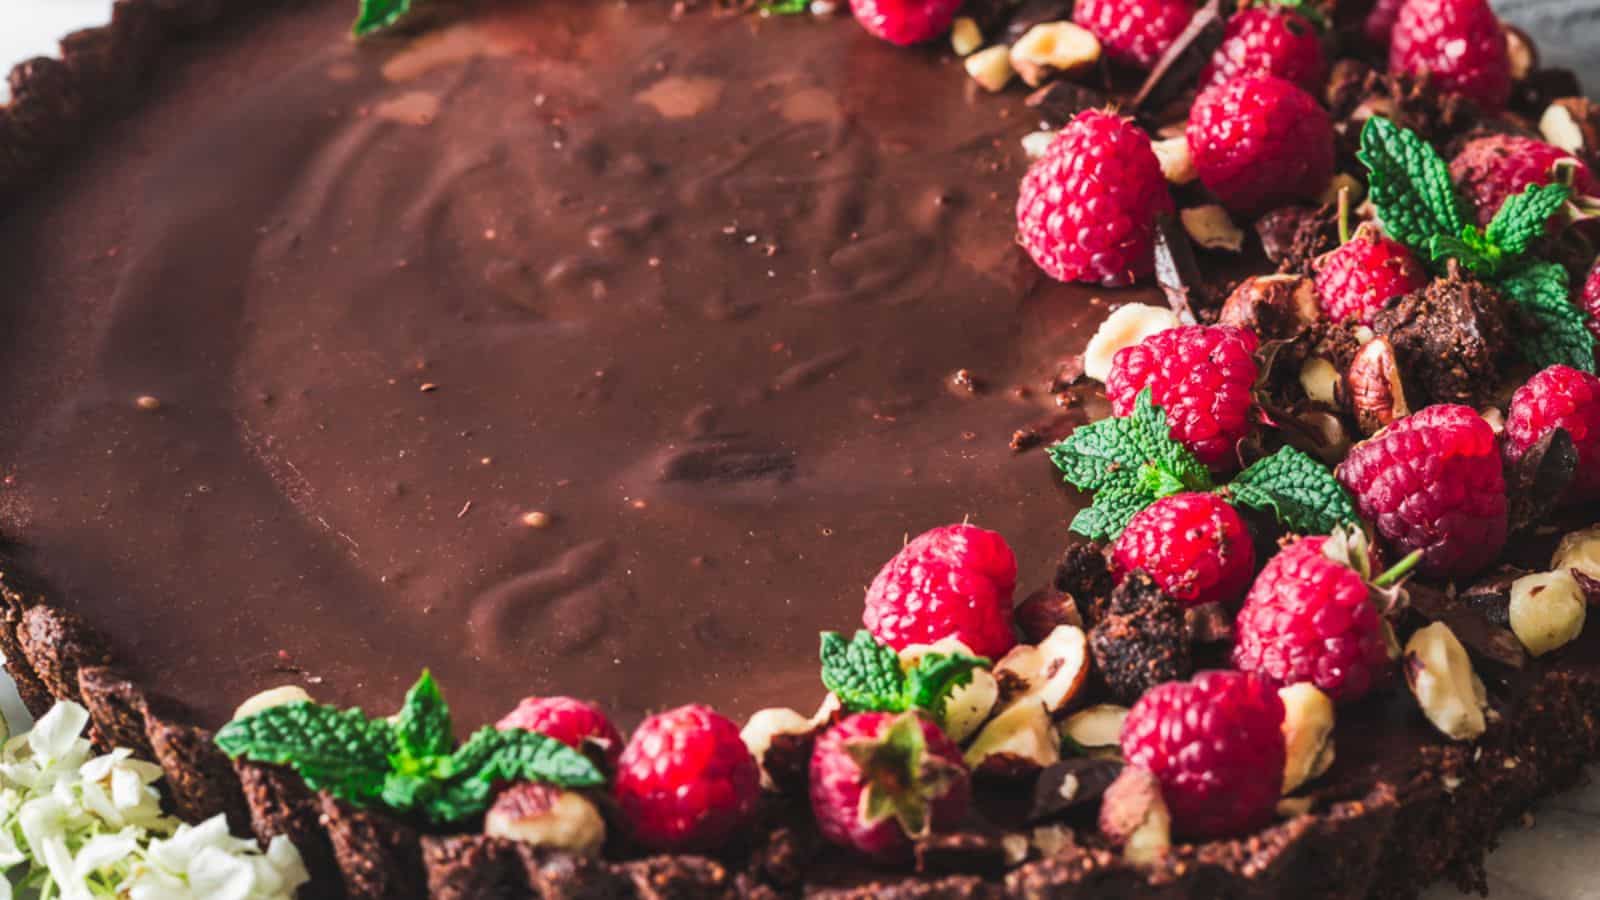 <p>The Chocolate Raspberry Tart marries the bold flavors of chocolate with the zesty taste of raspberries. In about 1 hour, you can create this dessert featuring a chocolate crust and a smooth ganache filling. Its luxurious taste profile makes it a memorable centerpiece for a graduation celebration.<br><strong>Get the Recipe: </strong><a href="https://immigrantstable.com/chocolate-raspberry-tart/?utm_source=msn&utm_medium=page&utm_campaign=17%20classic%20graduation%20cakes%20you%20wish%20you%20had%20in%20high%20school%20">Chocolate Raspberry Tart</a></p>